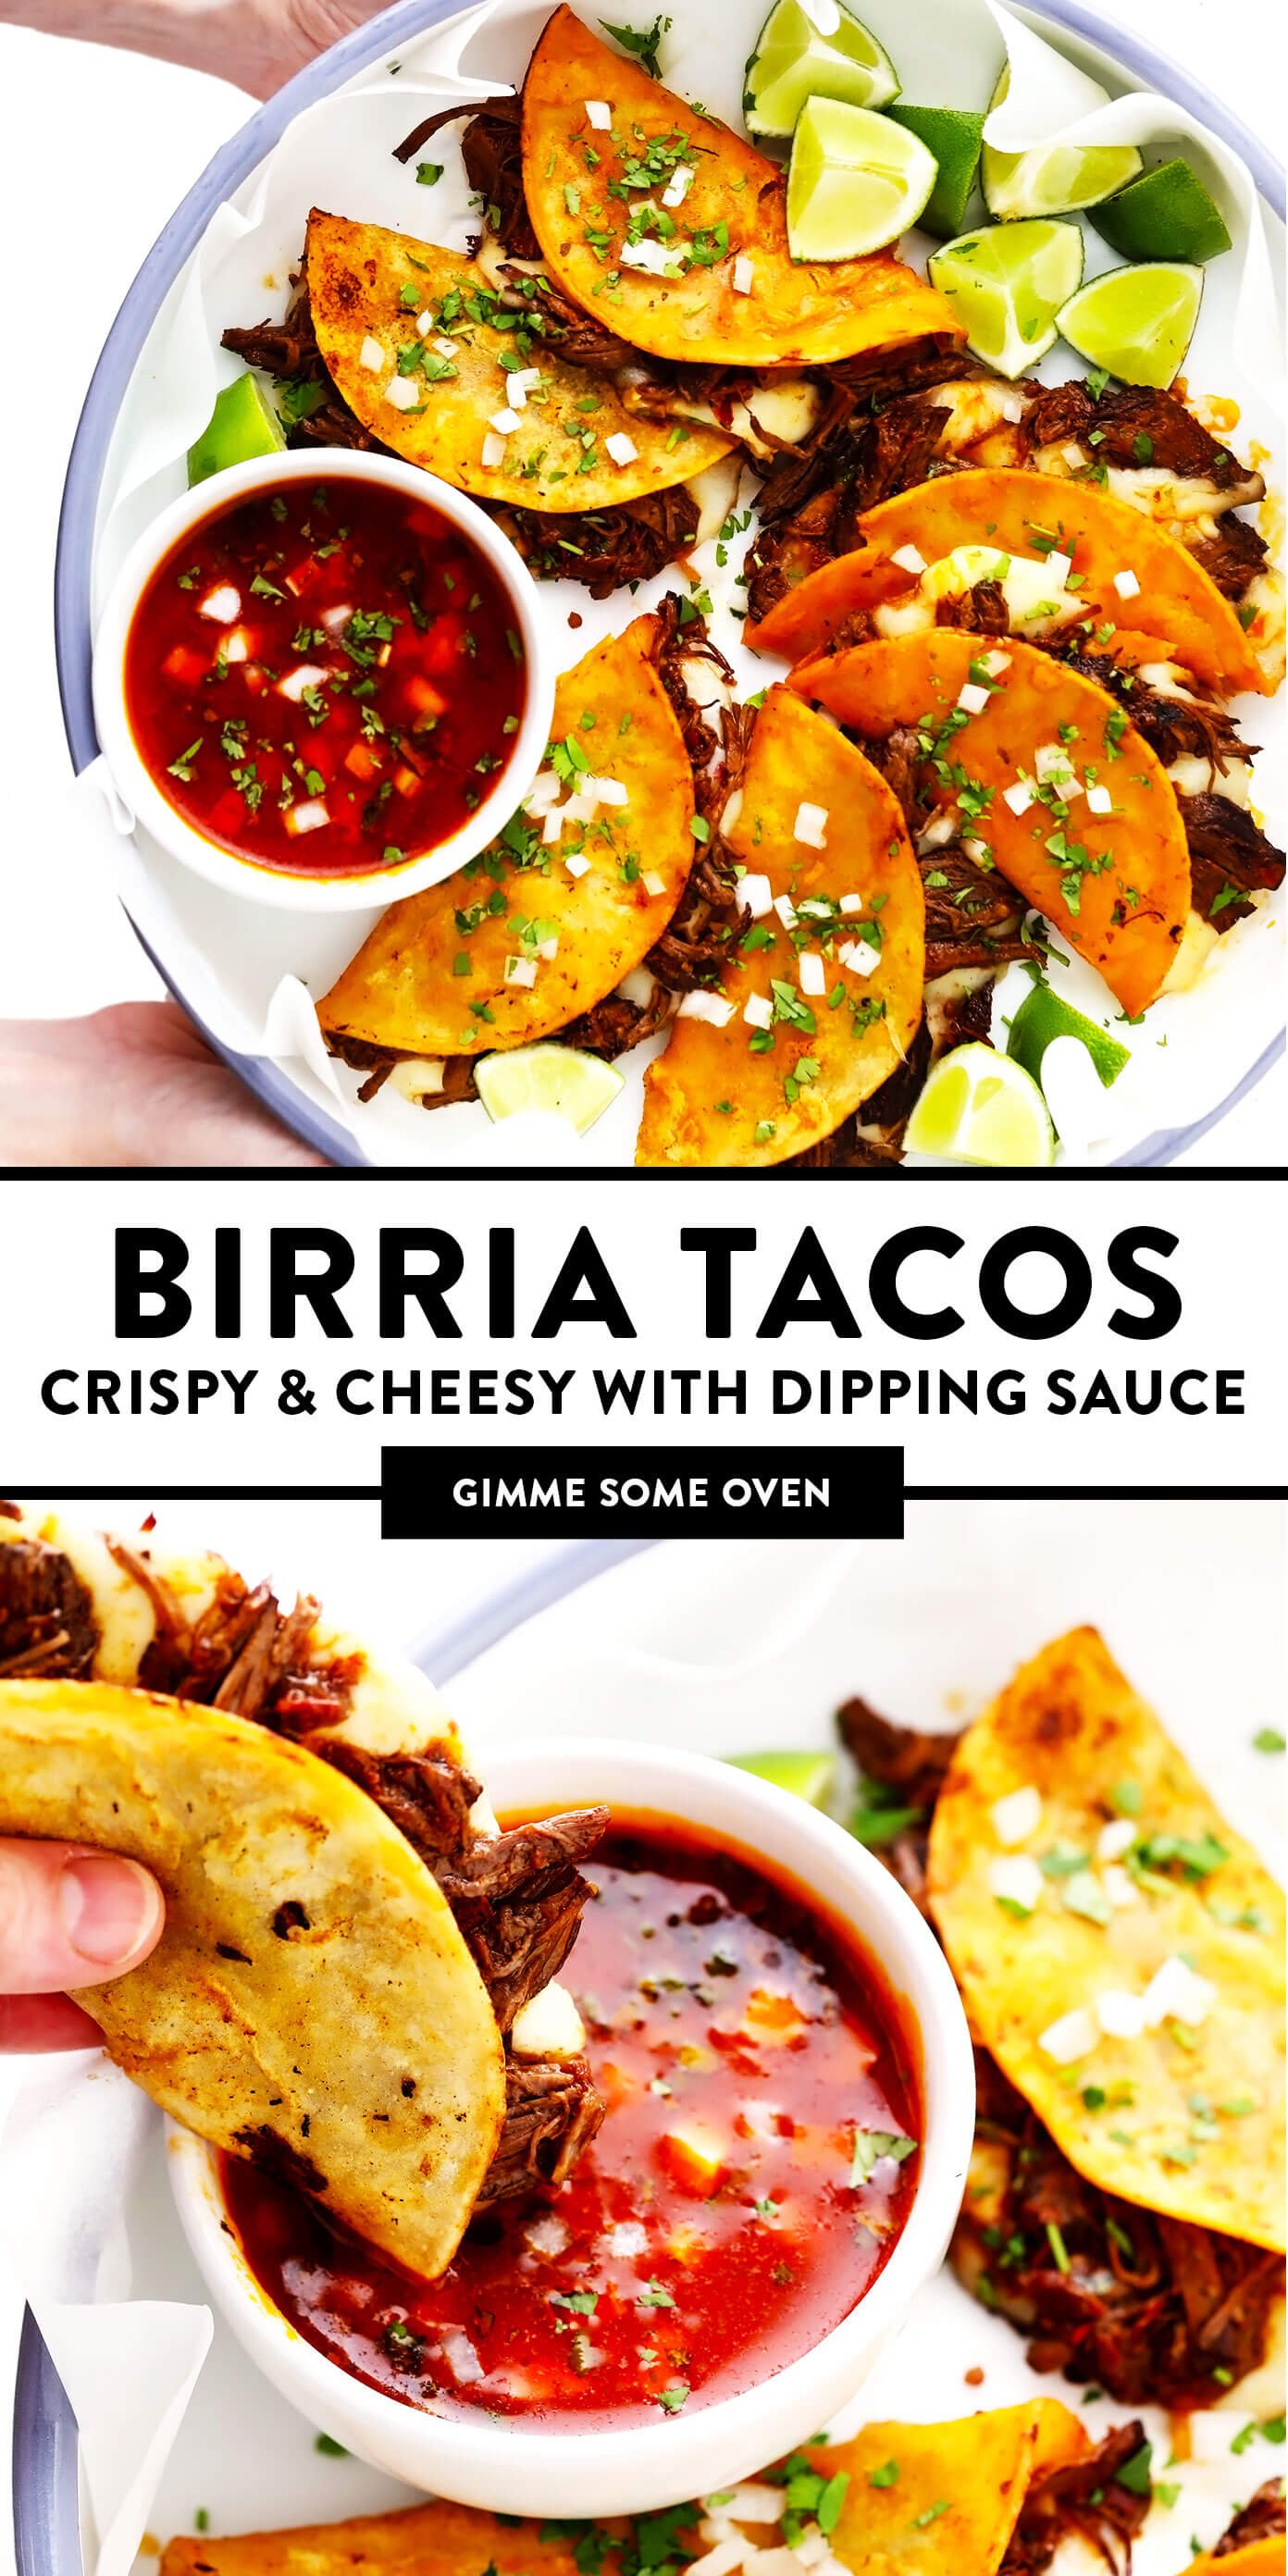 Birria Tacos (Crispy and Cheesy with Dipping Sauce)